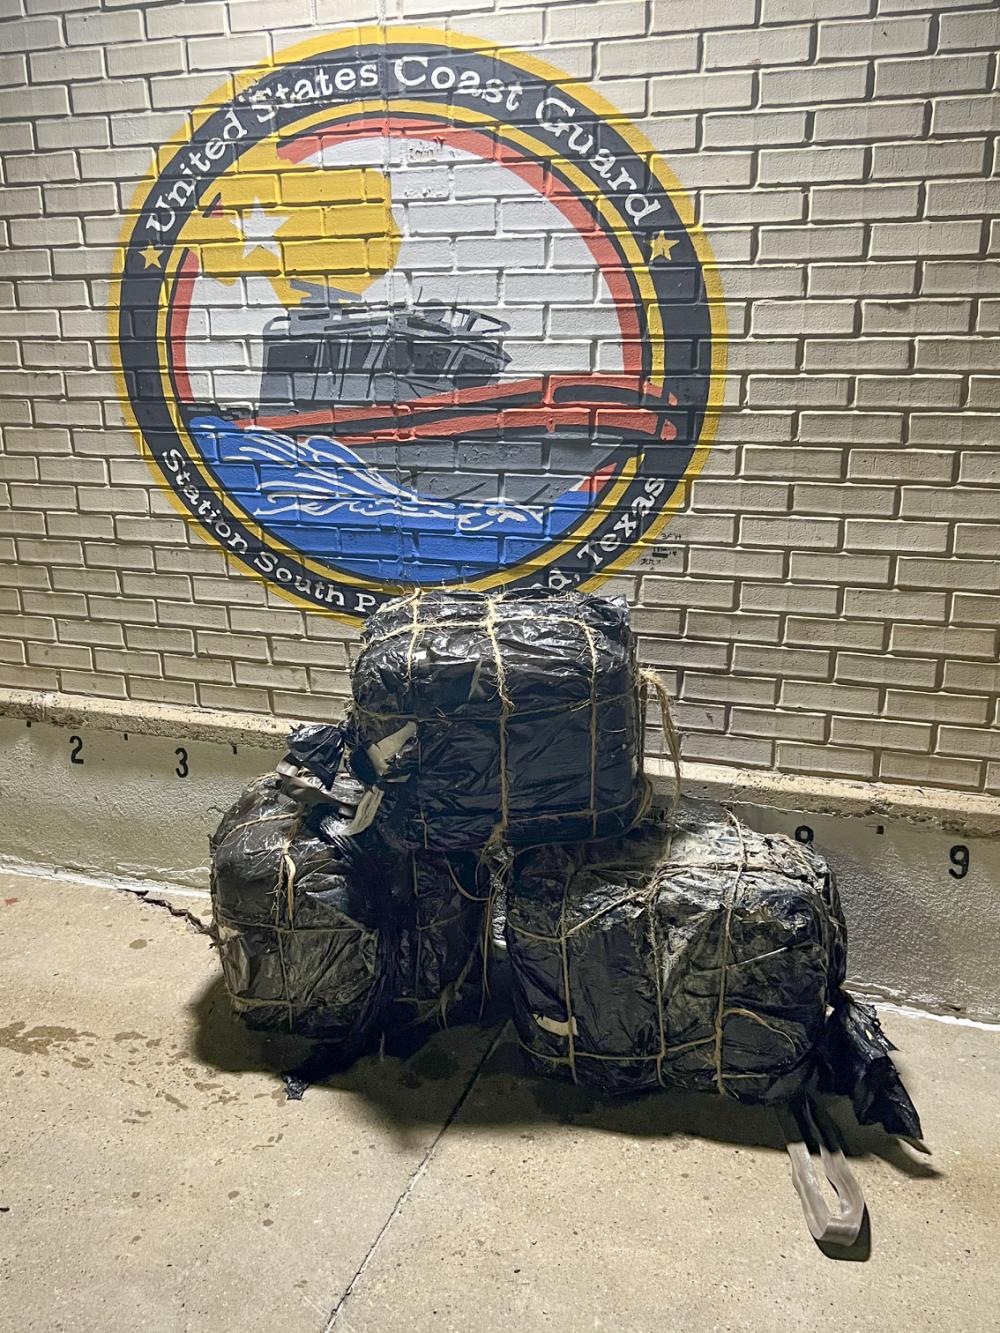 Bales of marijuana seized by a Coast Guard Station South Padre Island 33-foot Special Purpose Craft–Law Enforcement boat crew lay stacked at Station South Padre Island near Brownsville, Texas, April 29, 2022. After witnessing three individuals swimming across the Brownsville Ship Channel, the SPC–LE crew intercepted them and seized the 168 pounds of marijuana in their possession. (U.S. Coast Guard photo, courtesy Station South Padre Island)